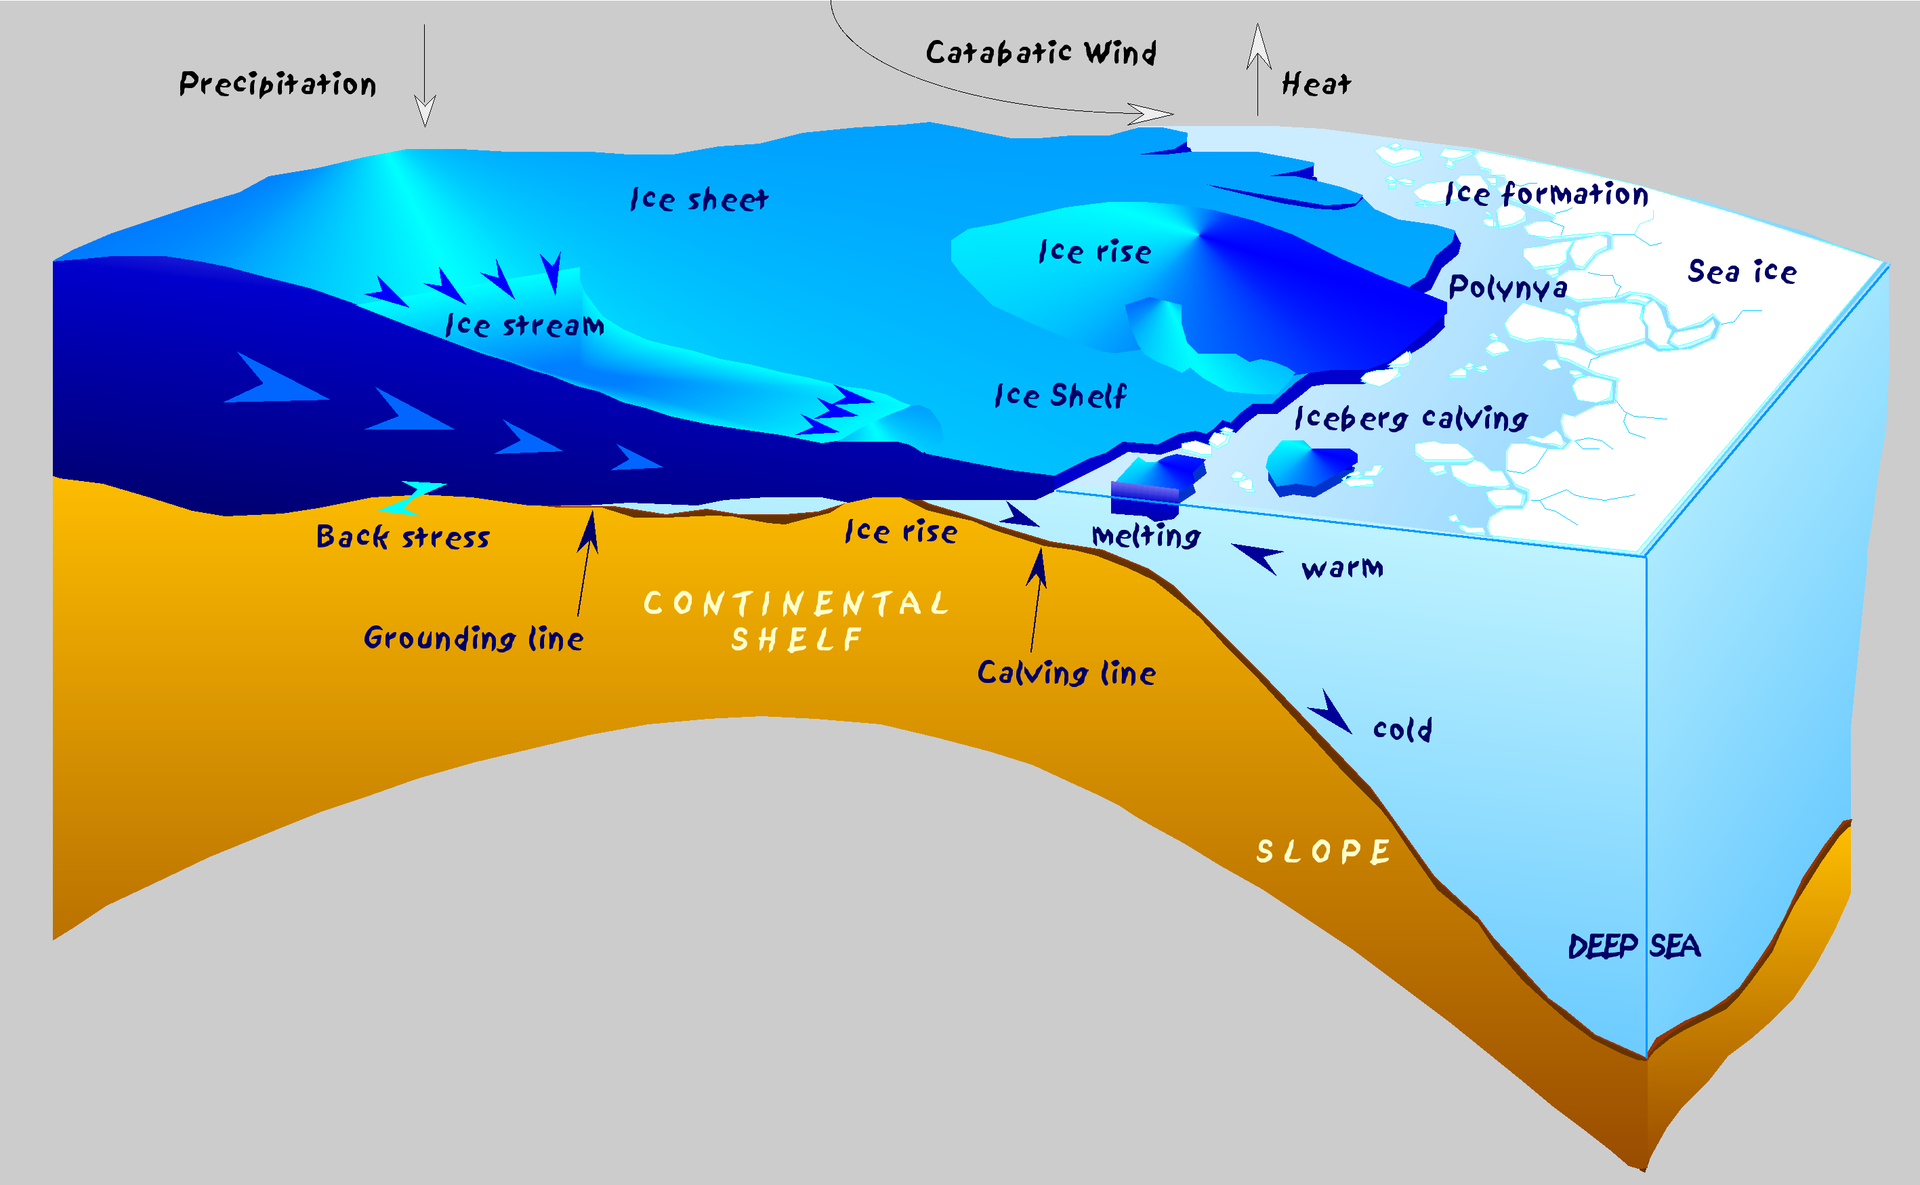 Source: Alfred Wegener Institute for Polar and Marine Research